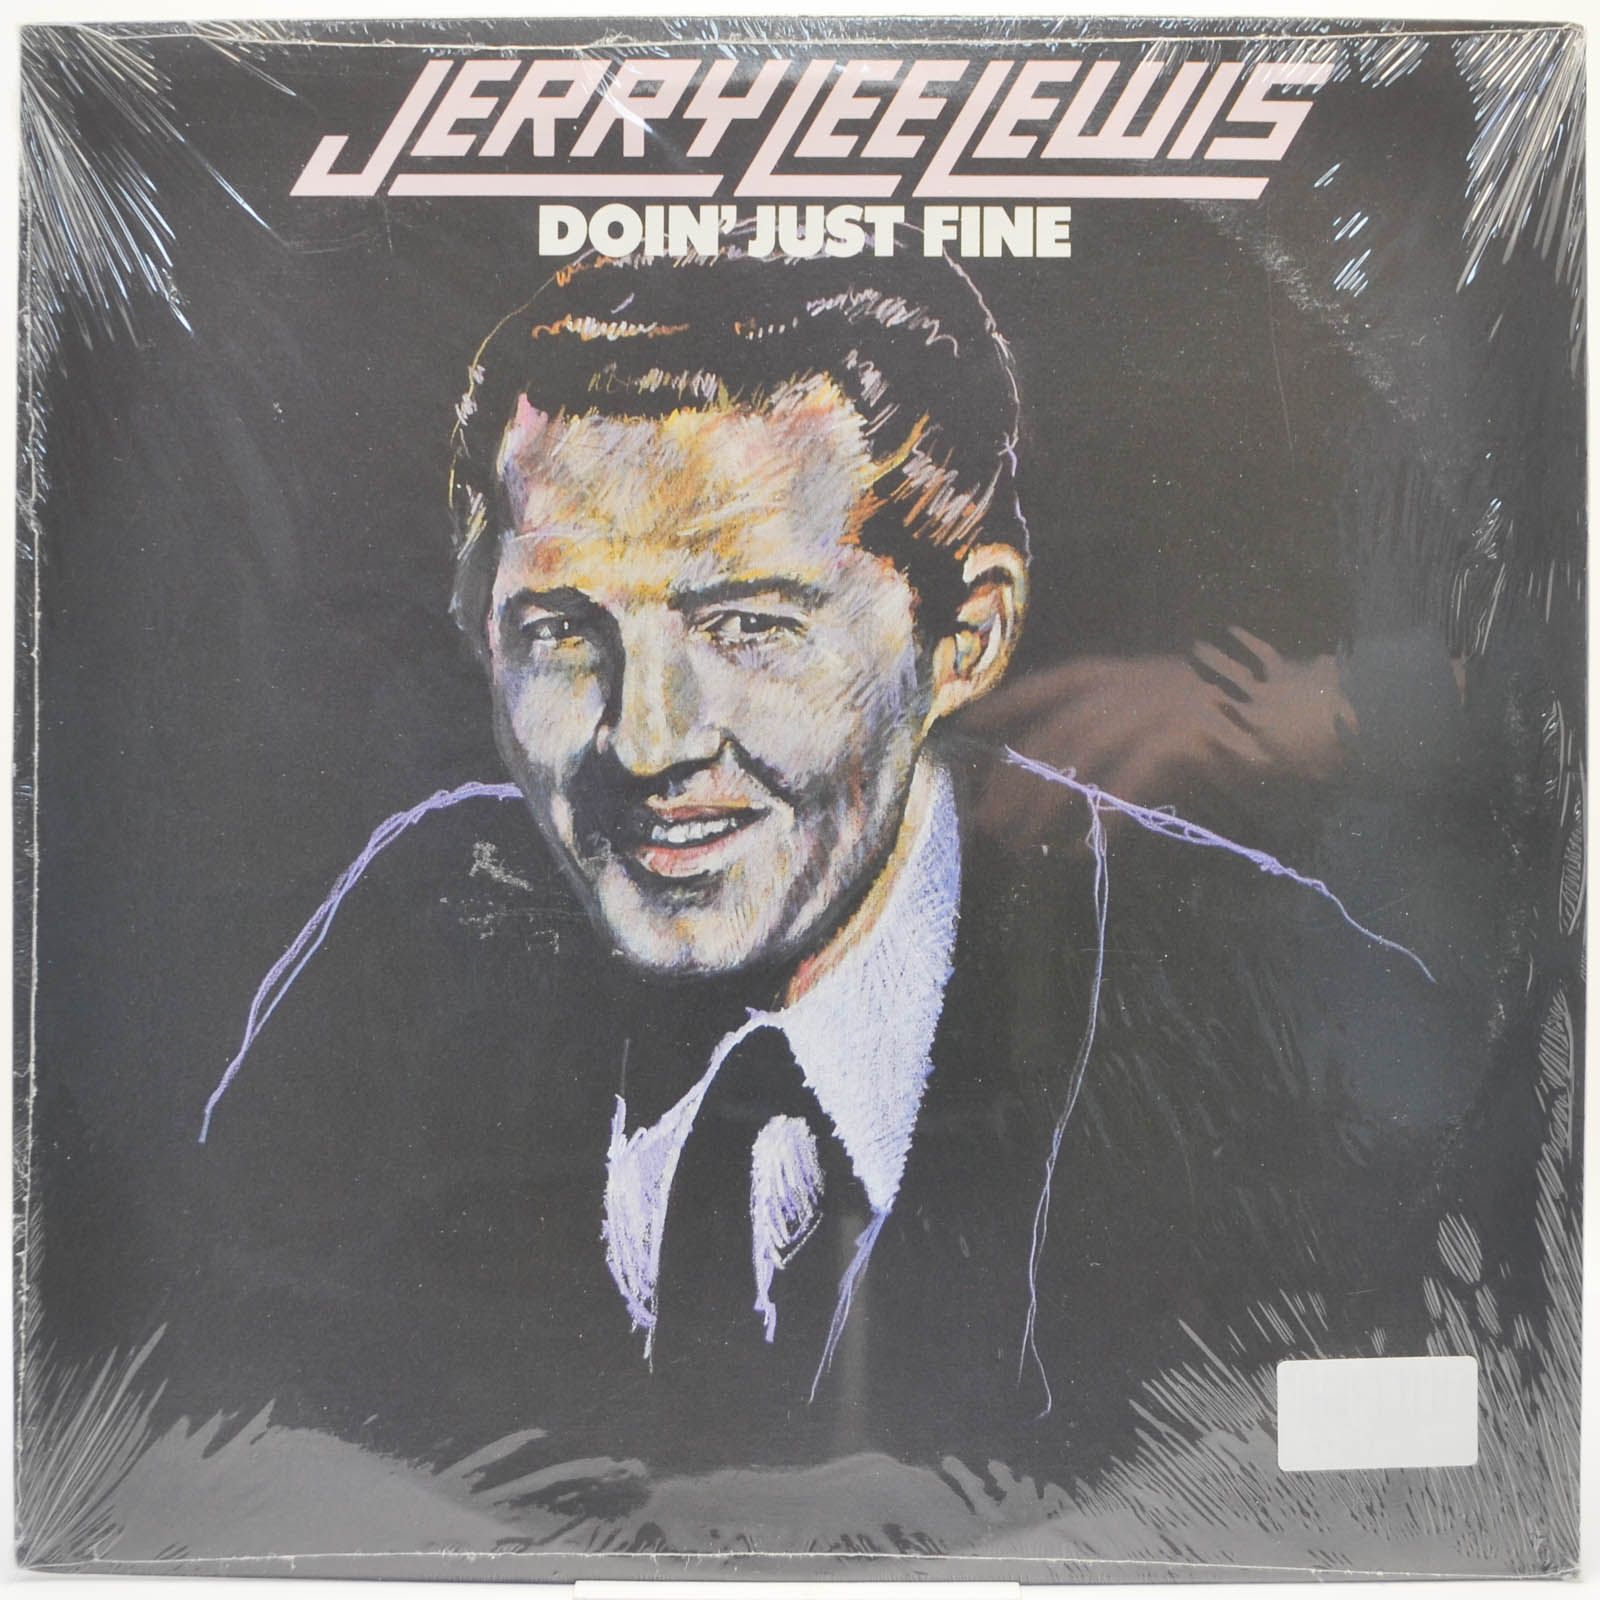 Jerry Lee Lewis — Doin' Just Fine (USA), 1982